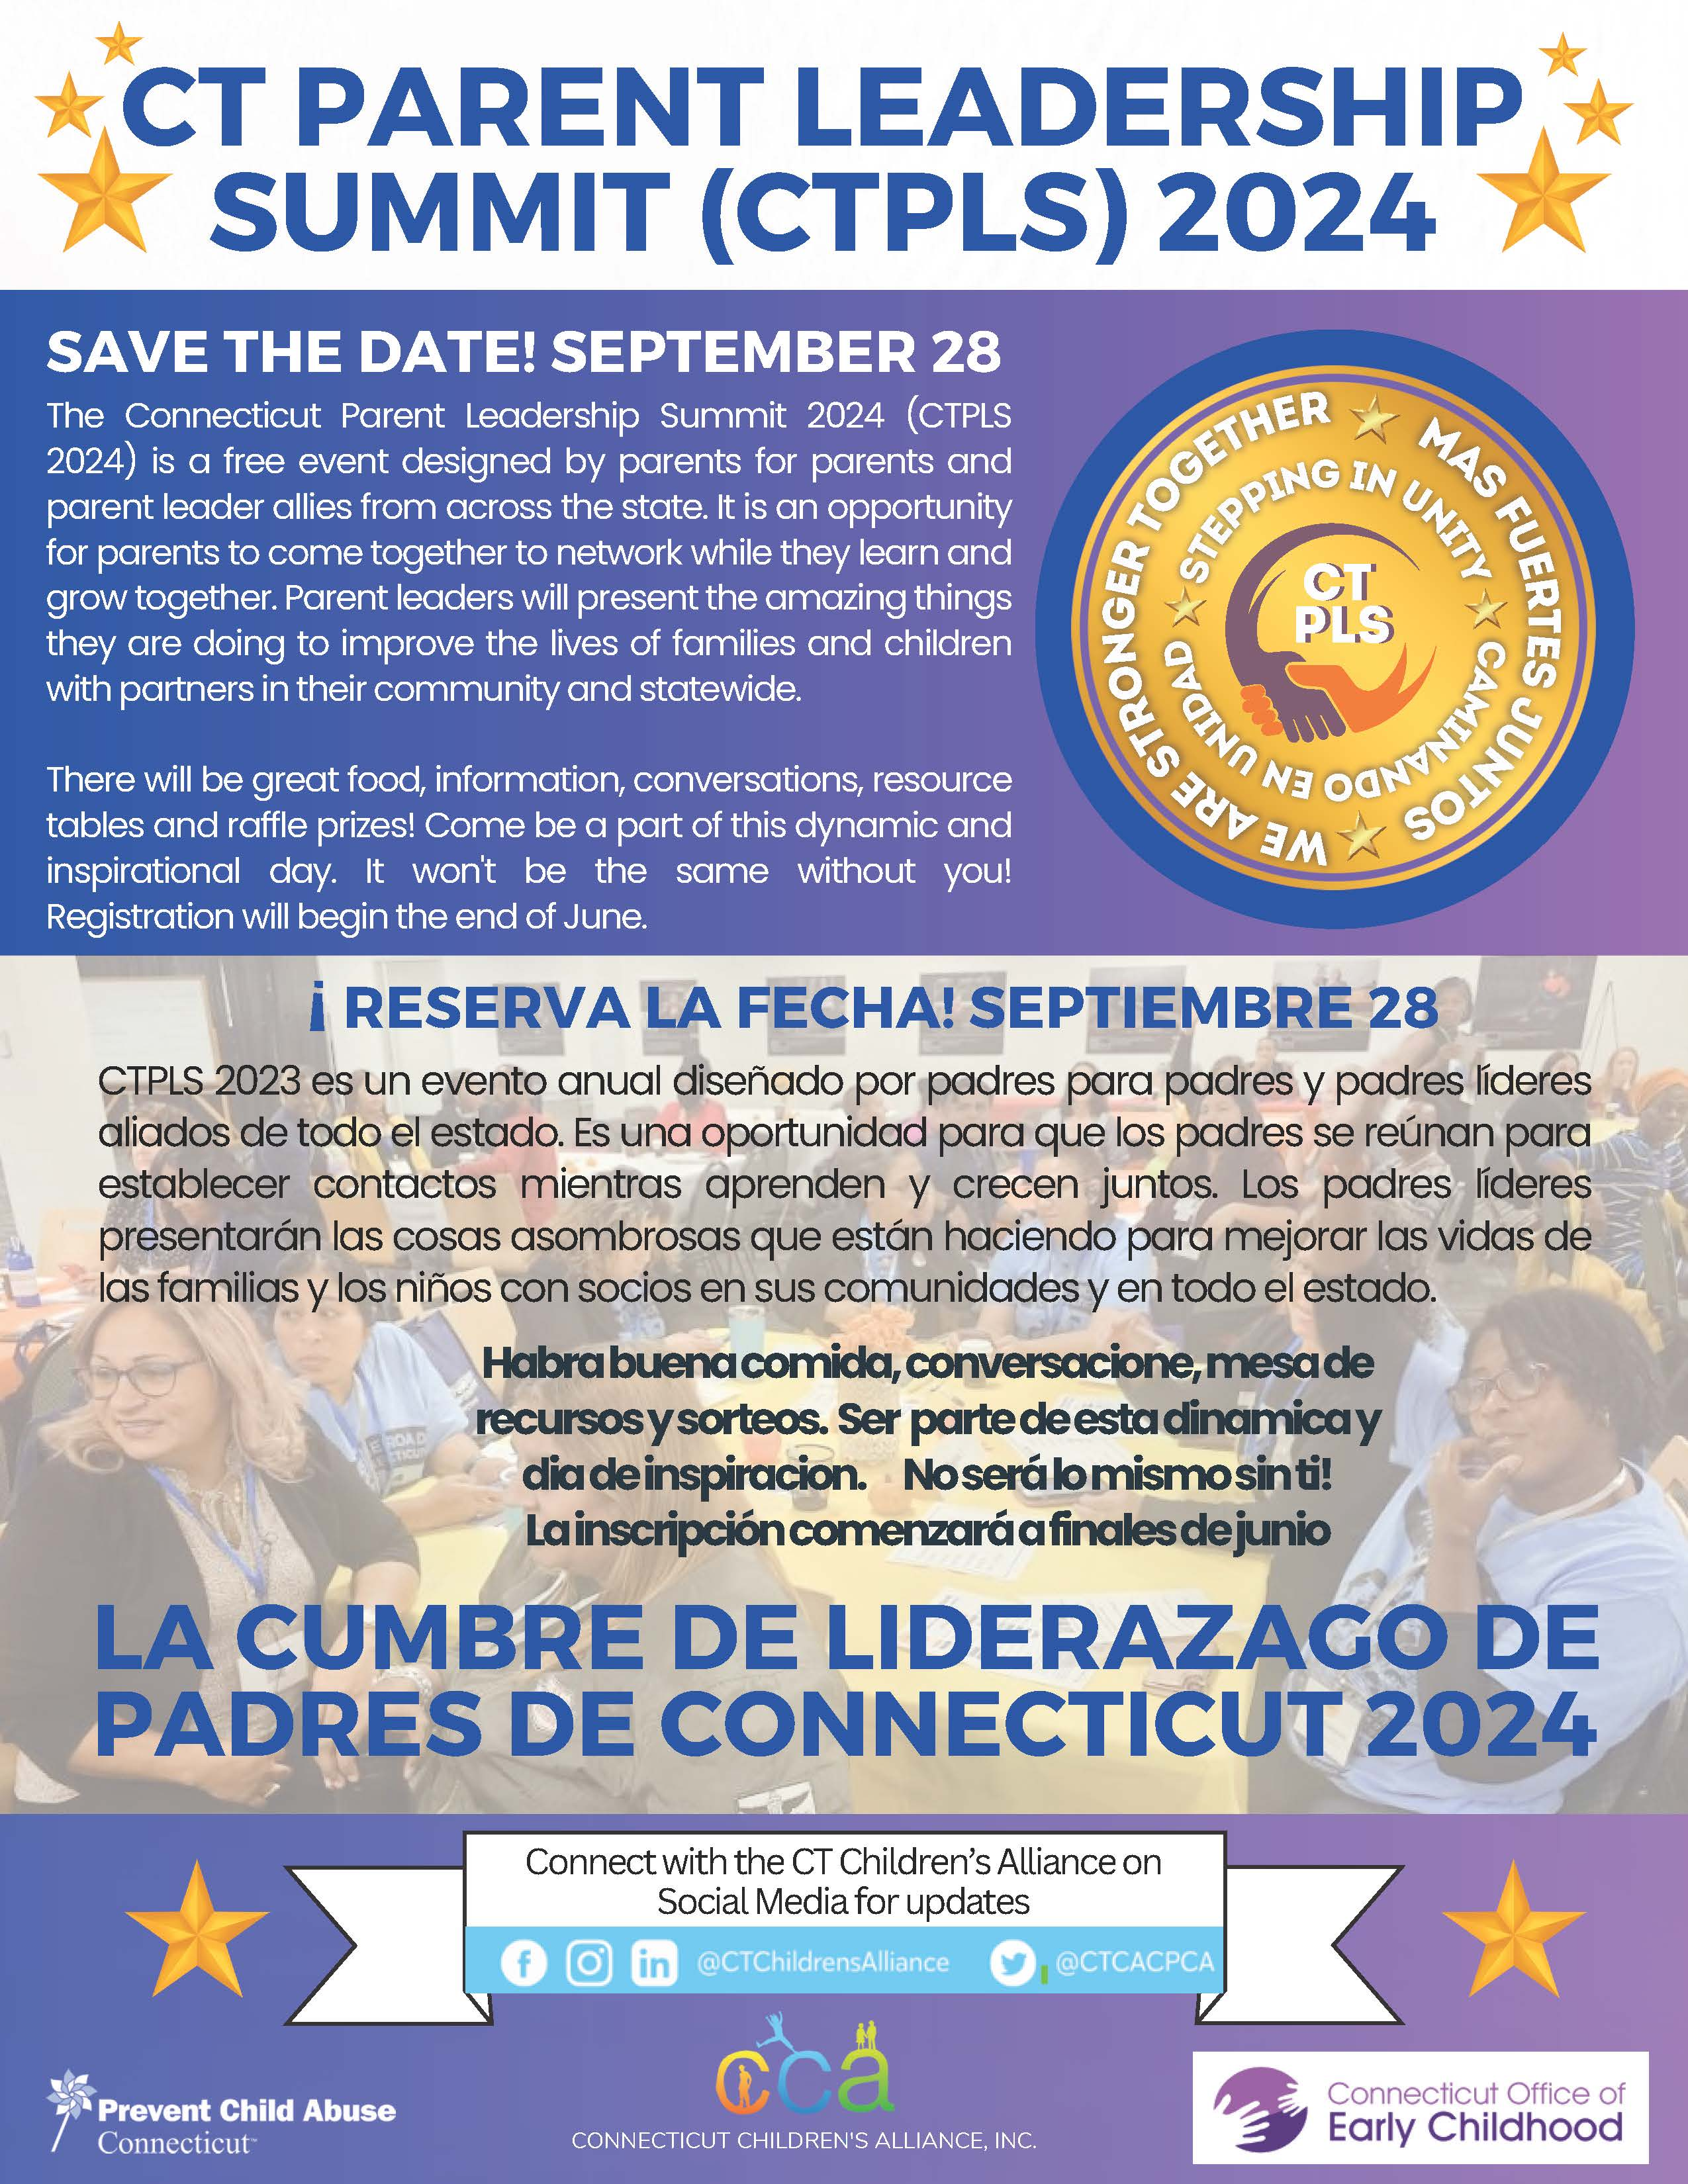 CT Parent Leadership Summit that will be held September 28th